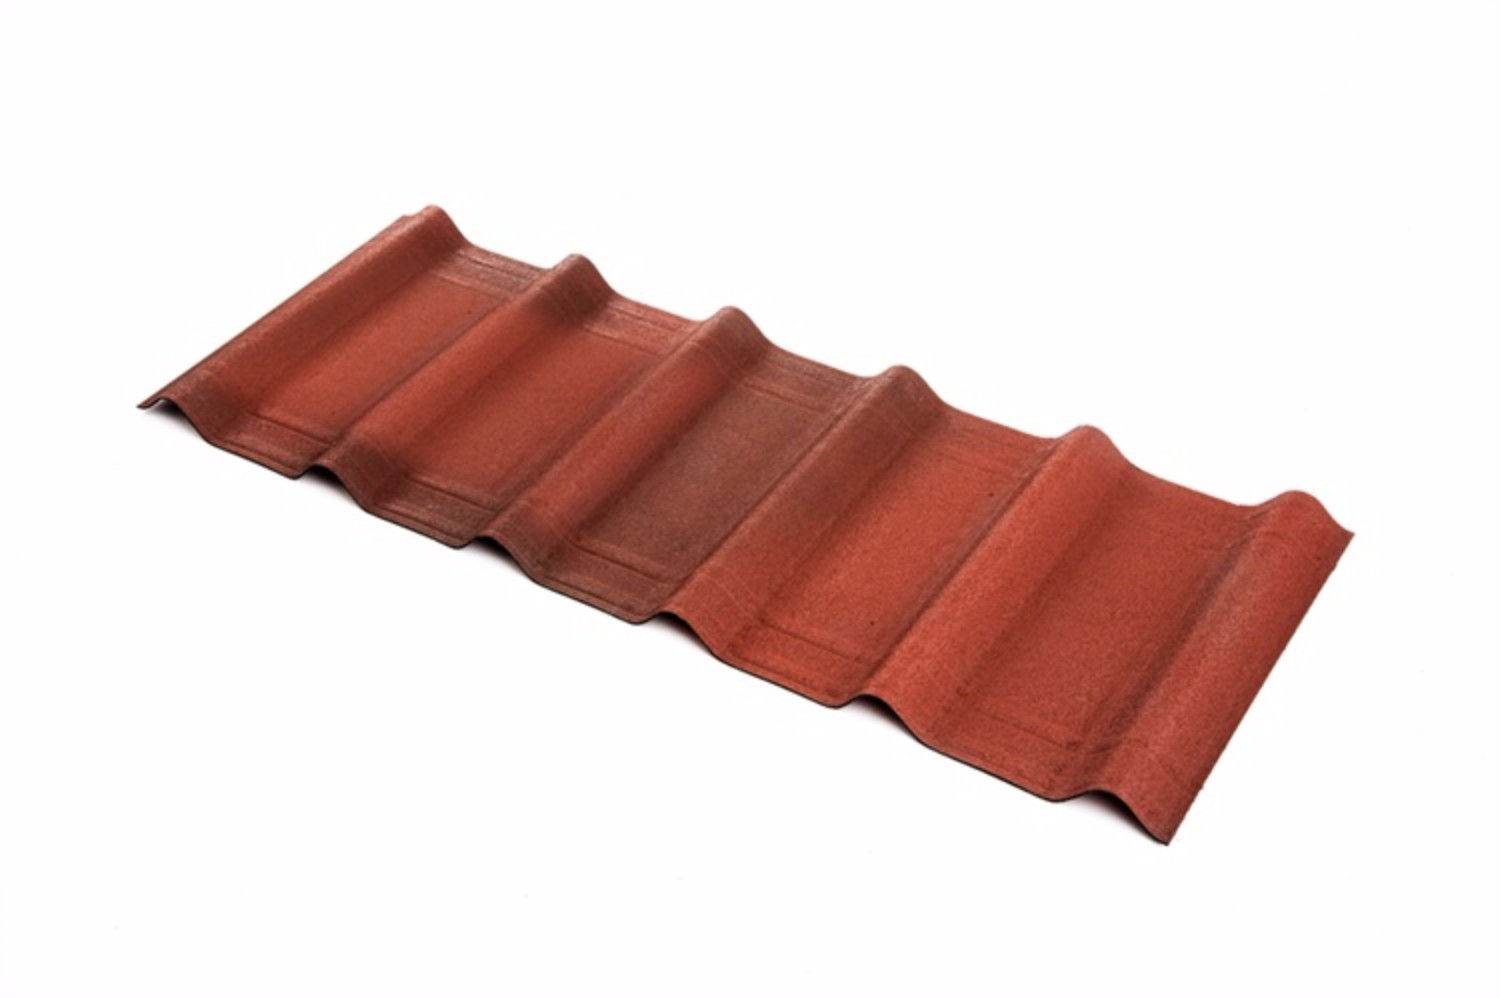 Onduvilla - Bitumen Roof Tiles - Shaded Red (2.18 m2 Coverage - Pack of 7)